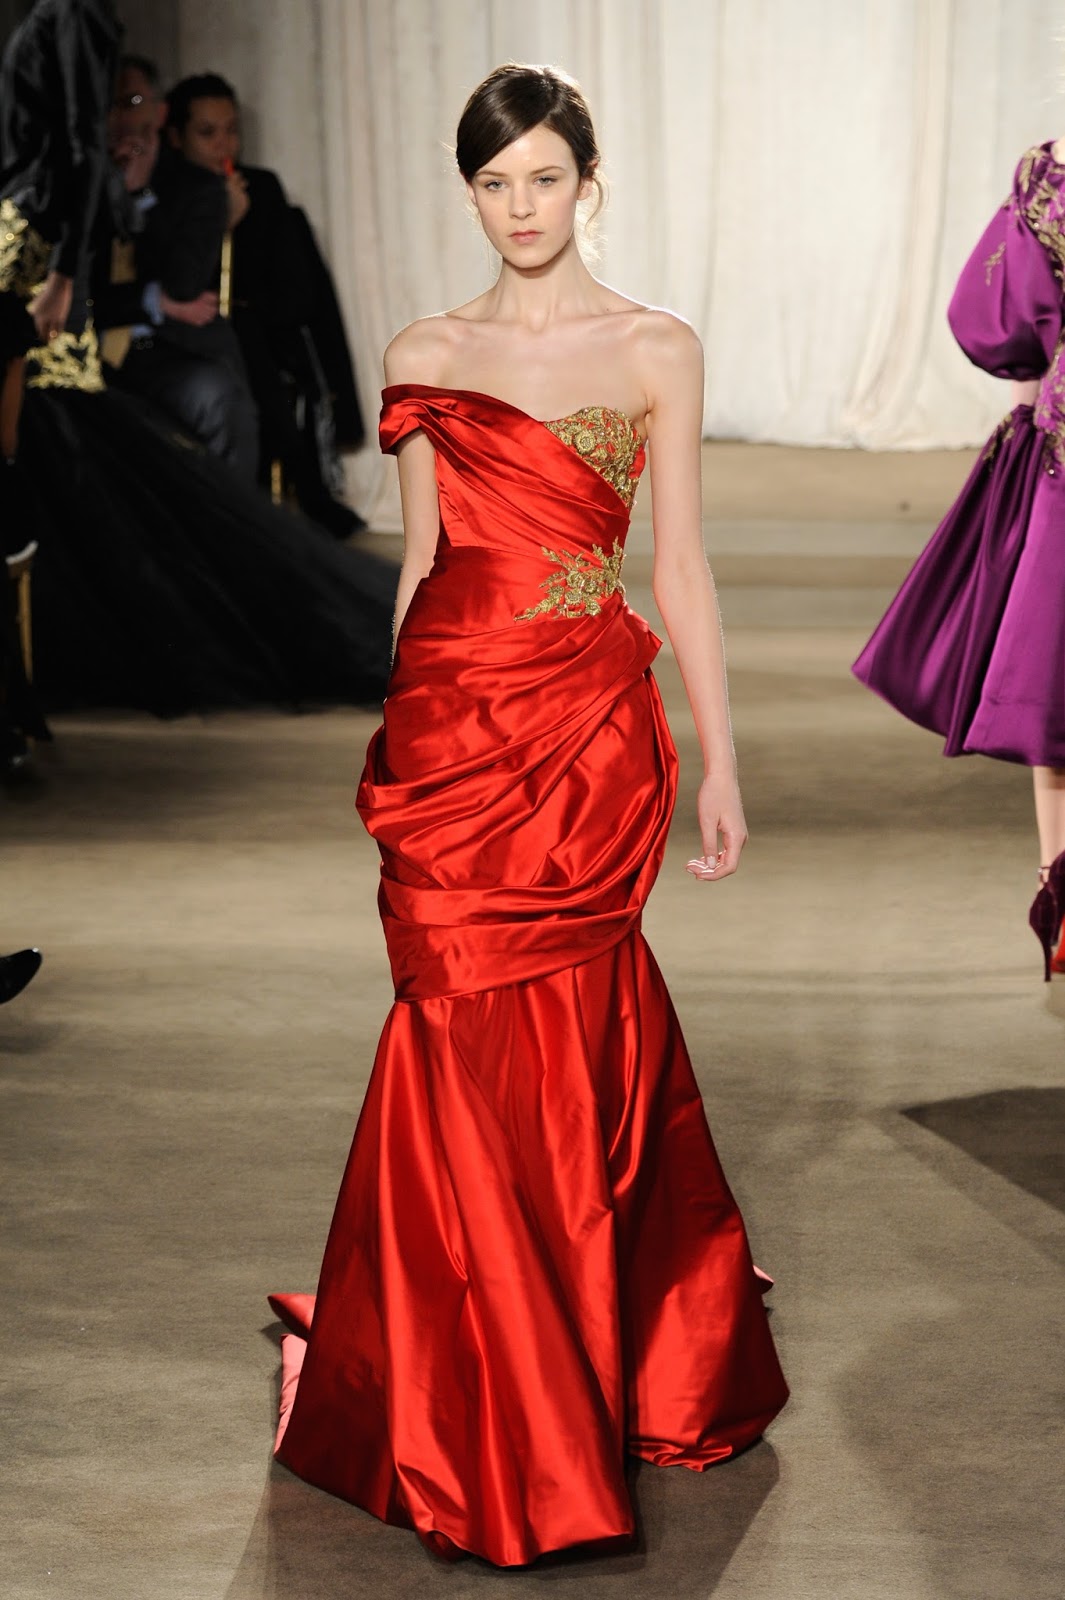 Spleen De Couture: FESTIVE RED AND GOLD